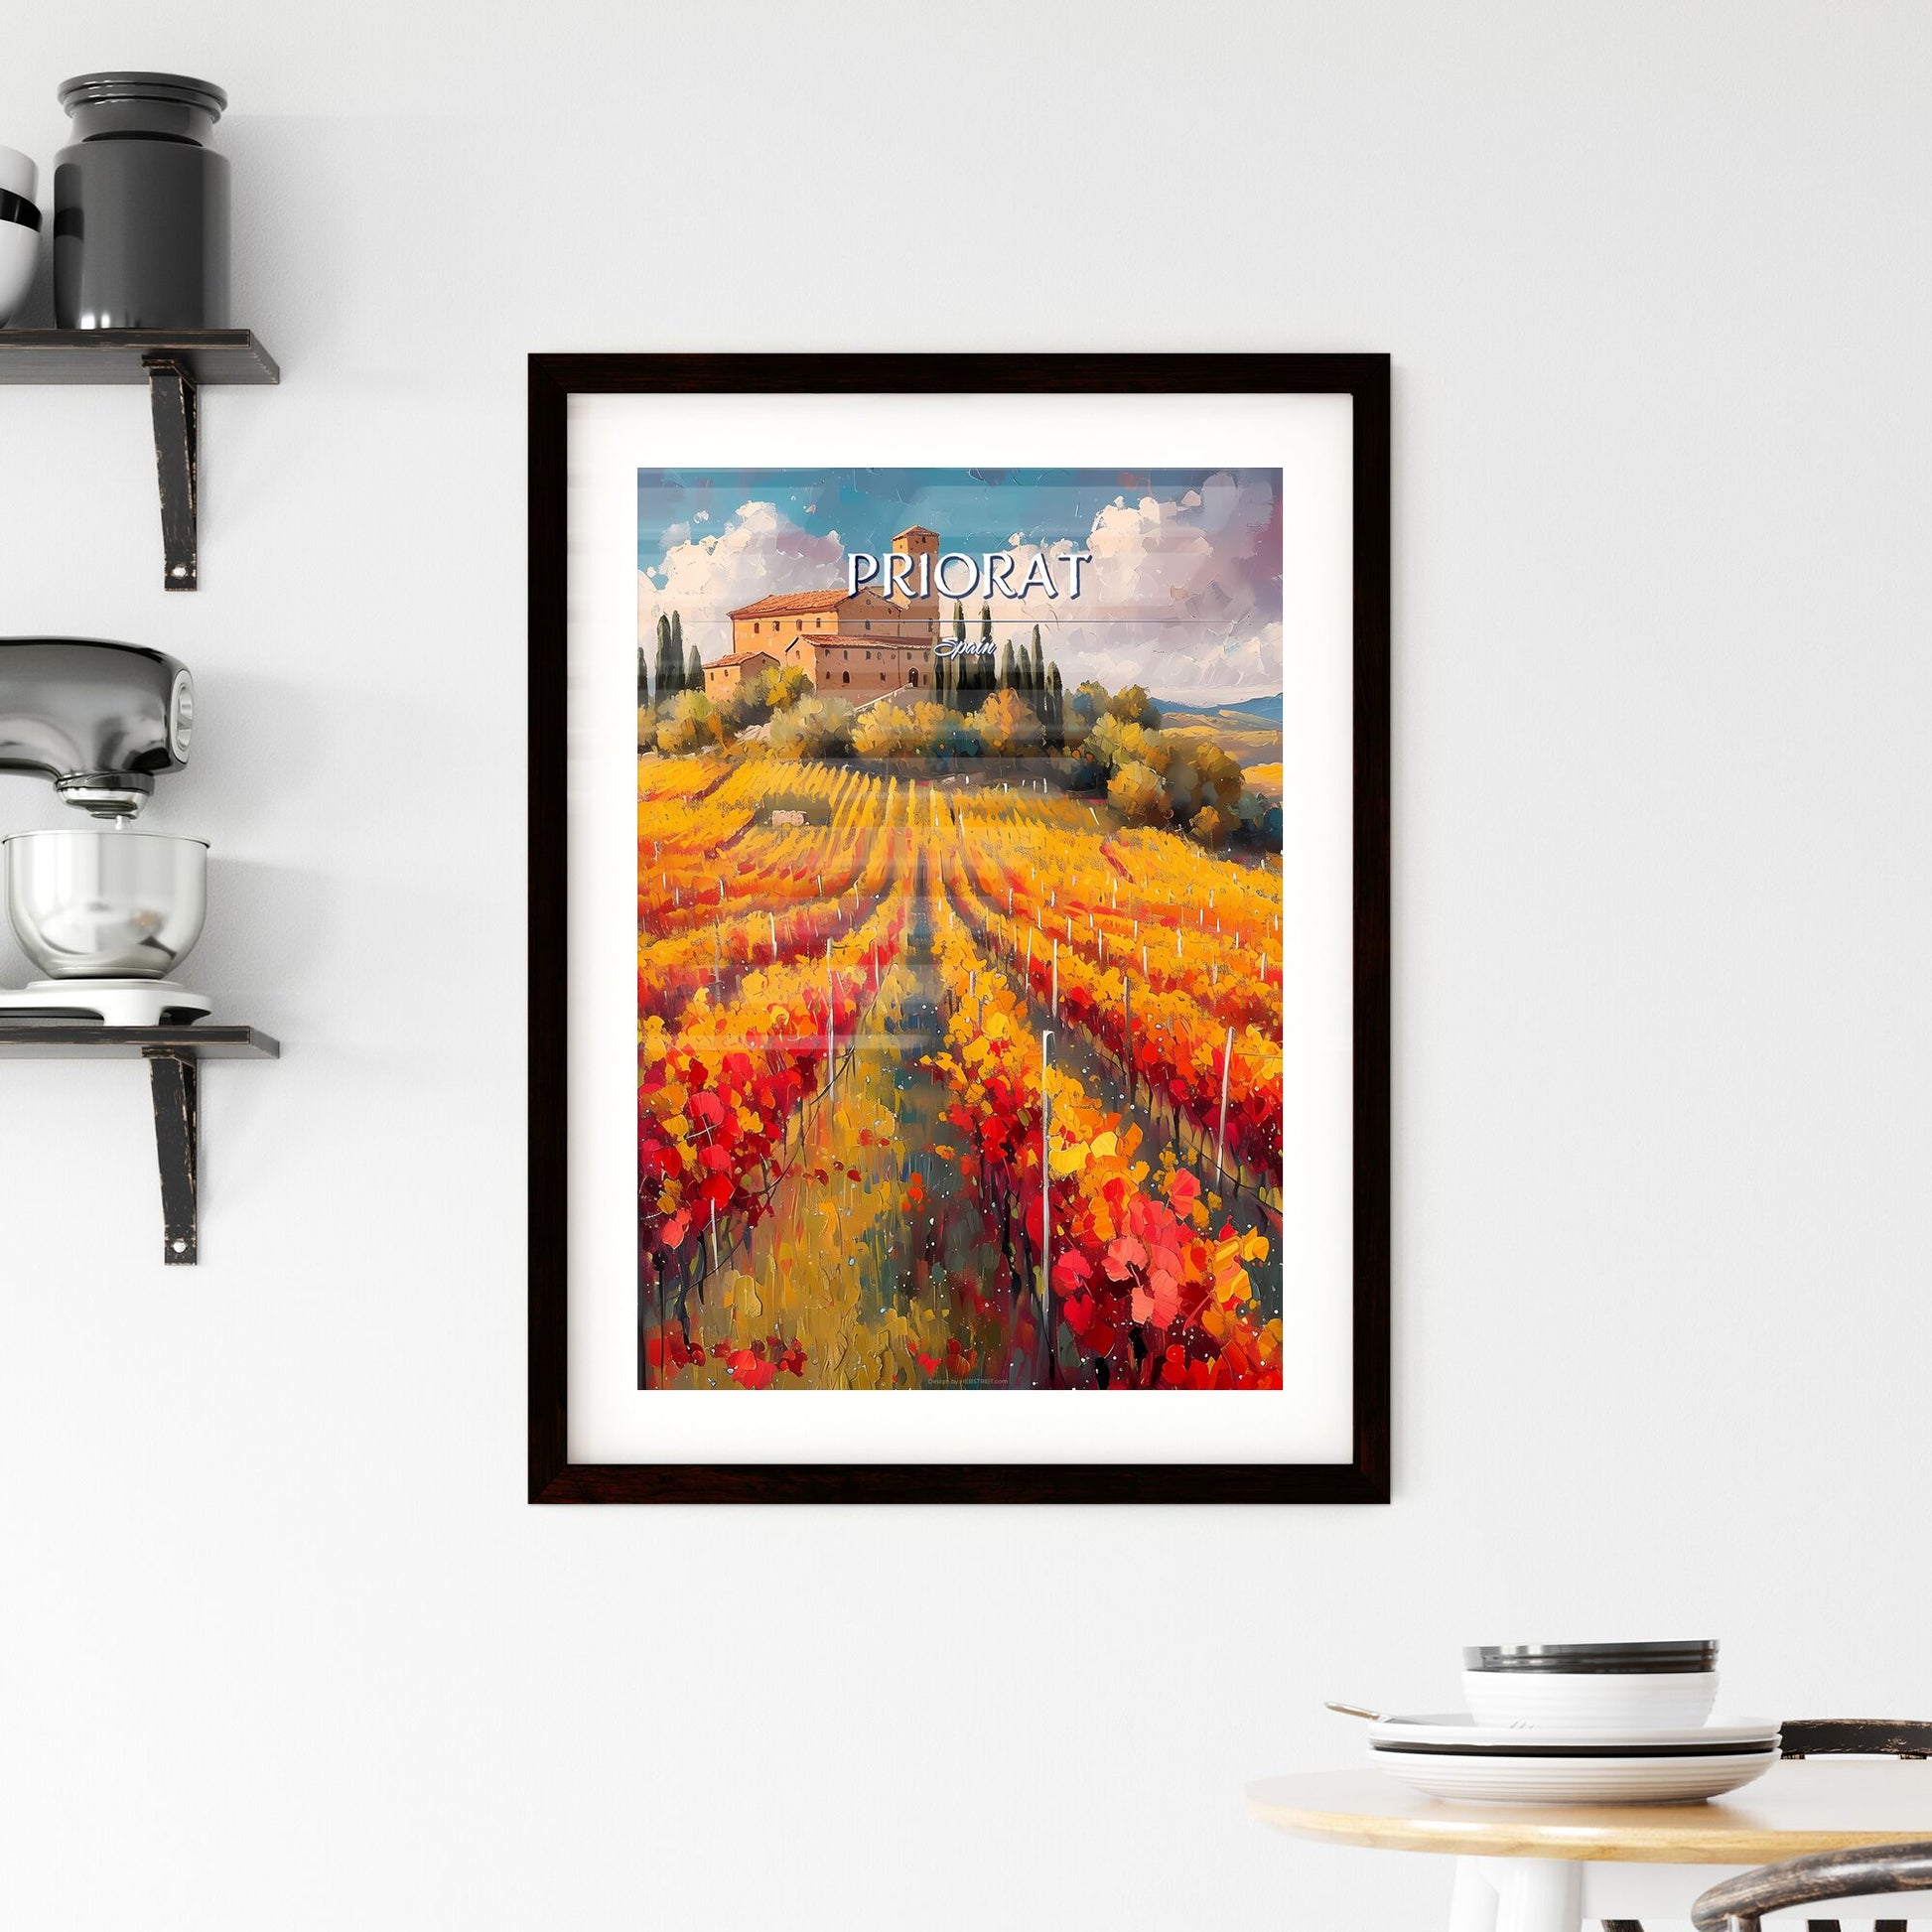 Priorat, Spain - Art print of a painting of a house on a hill with rows of colorful vines Default Title